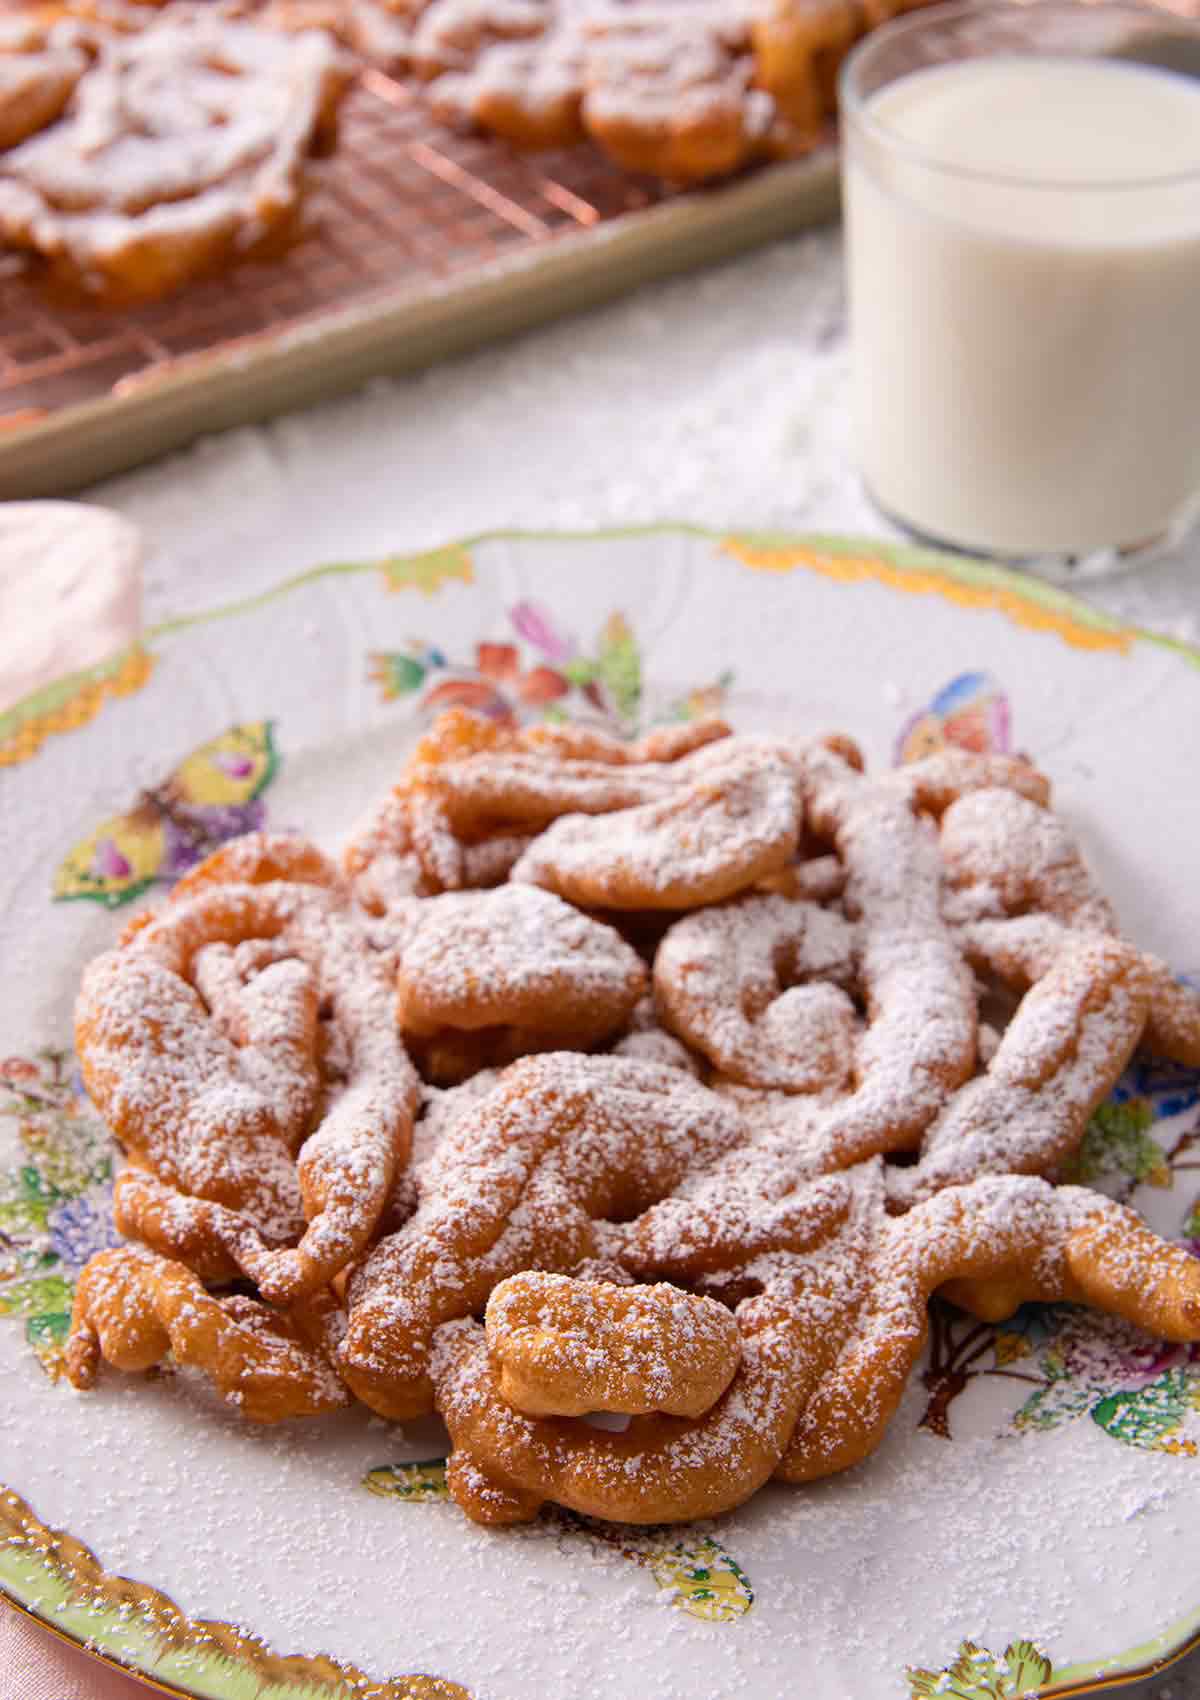 Funnel cake with a dusting of powdered sugar on a serving plate with a glass on milk in the background.